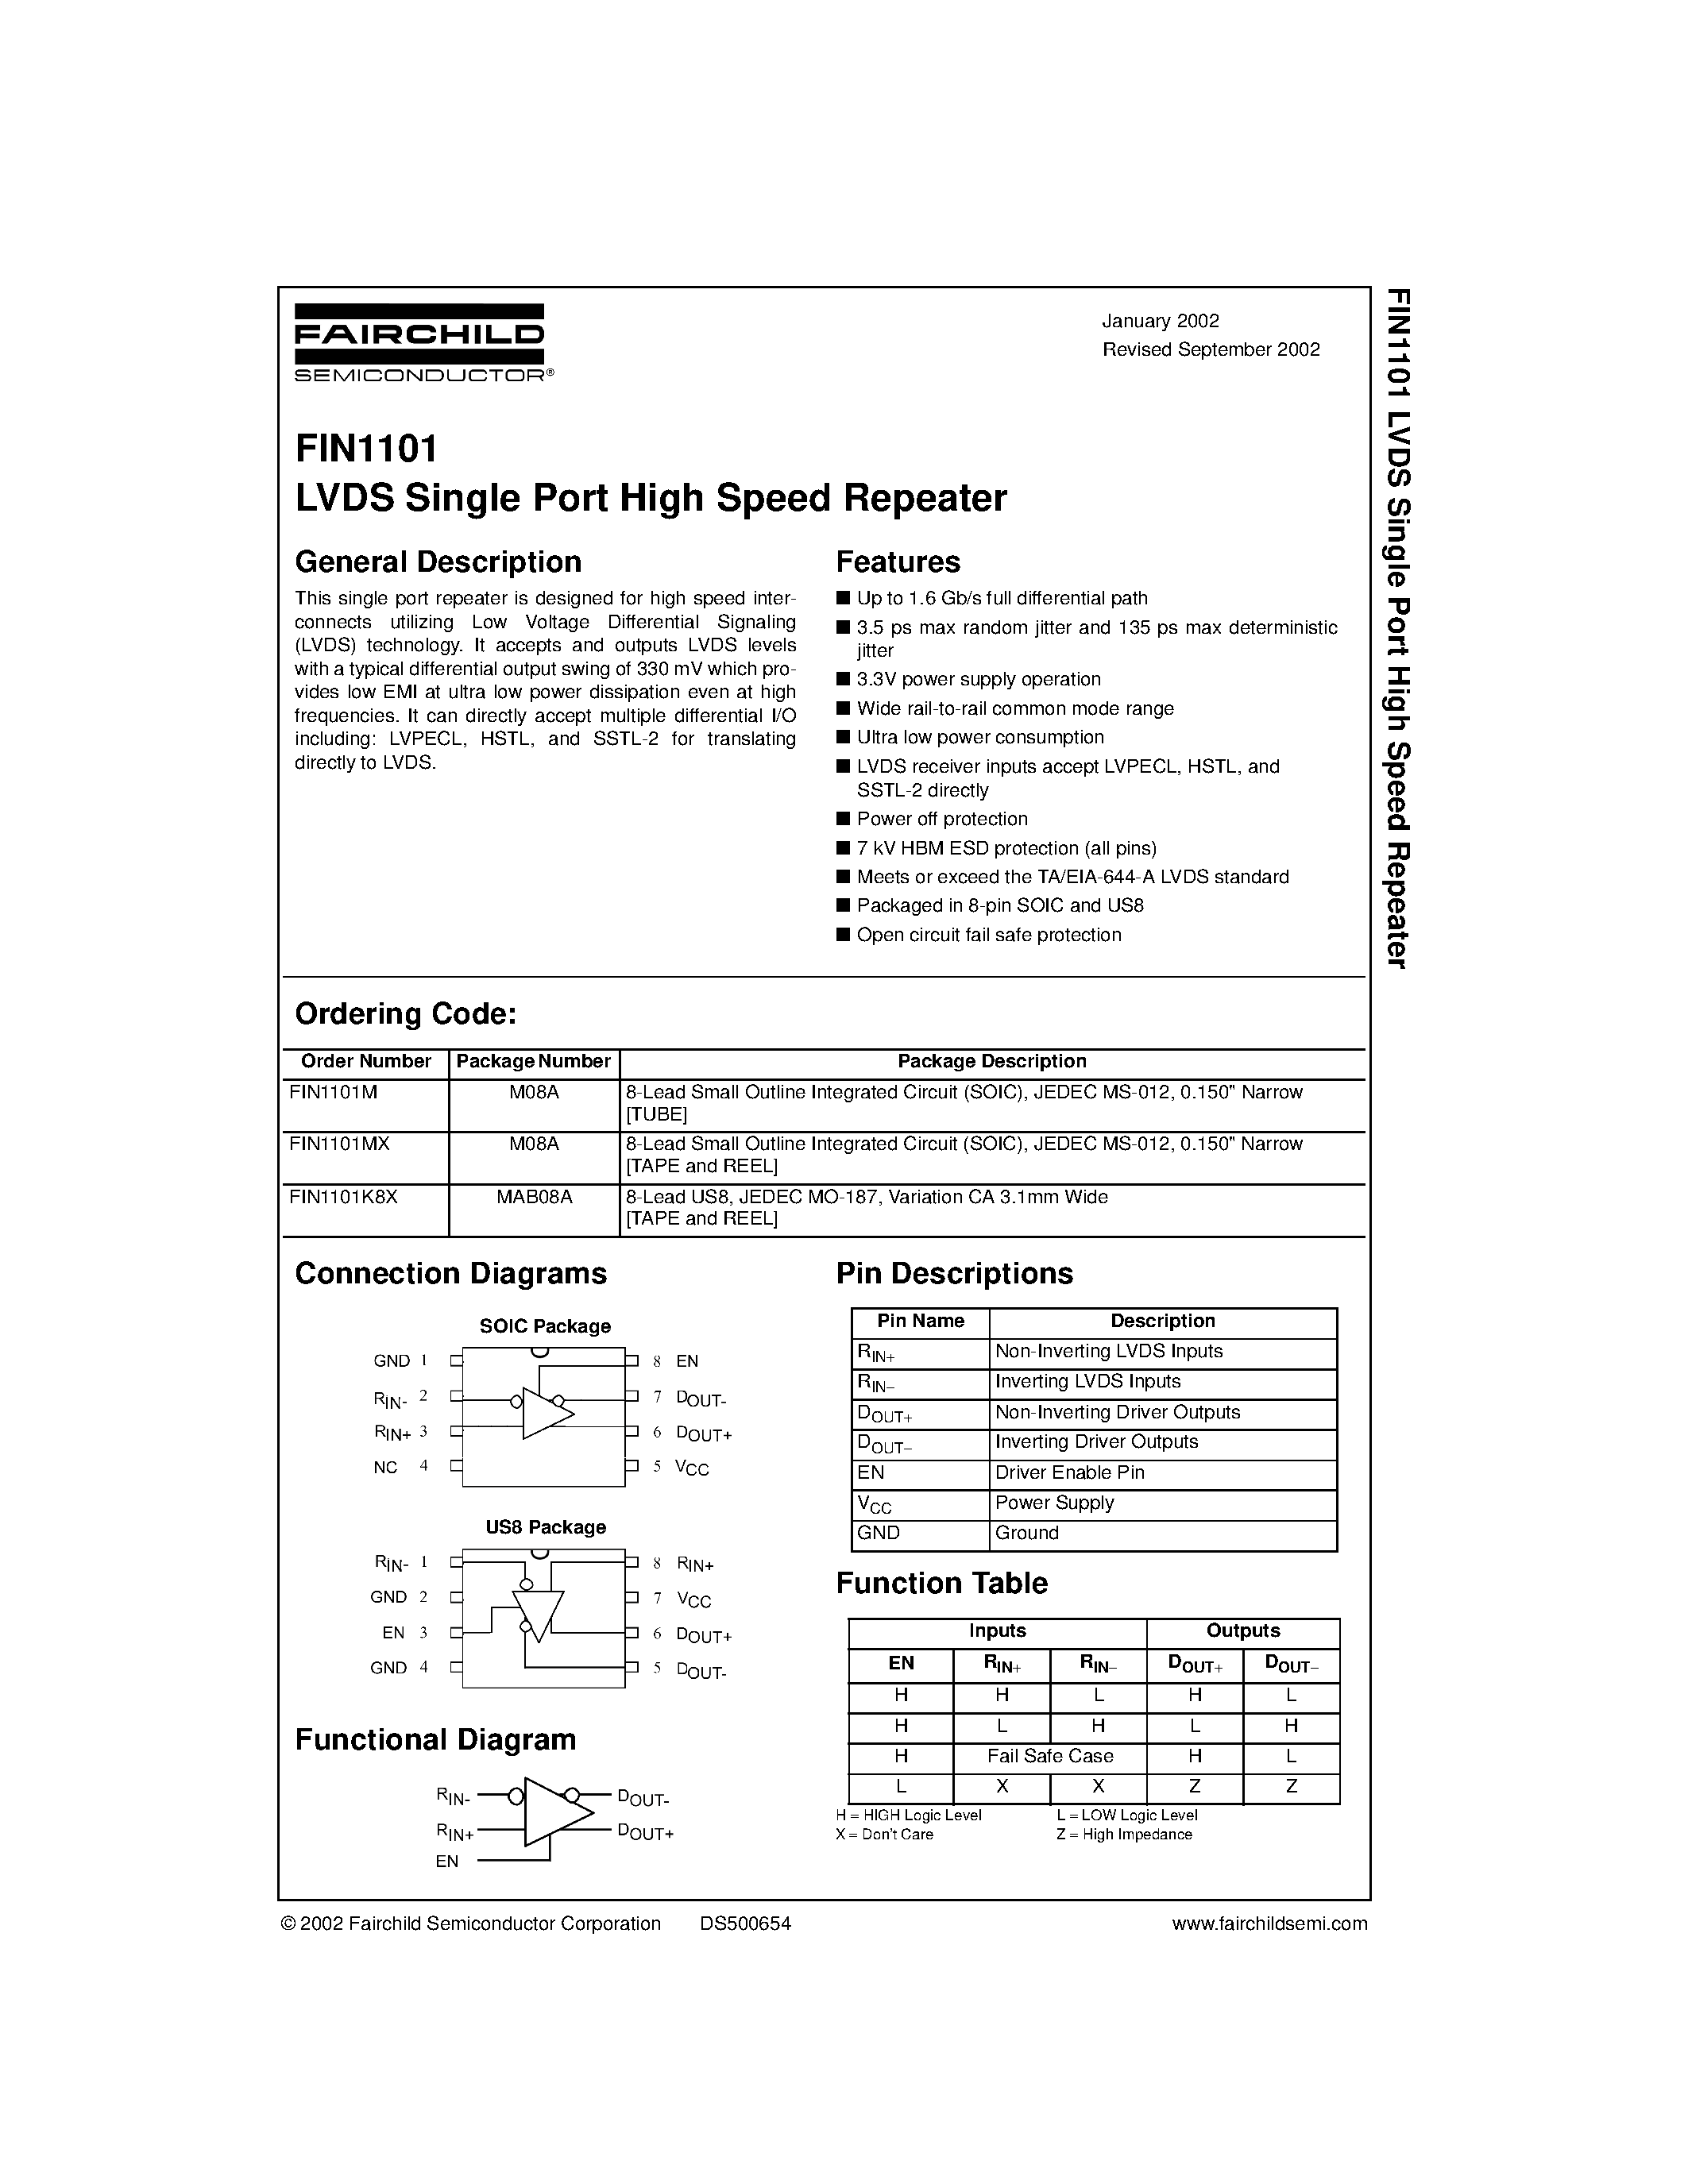 Datasheet FIN1101 - LVDS Single Port High Speed Repeater page 1